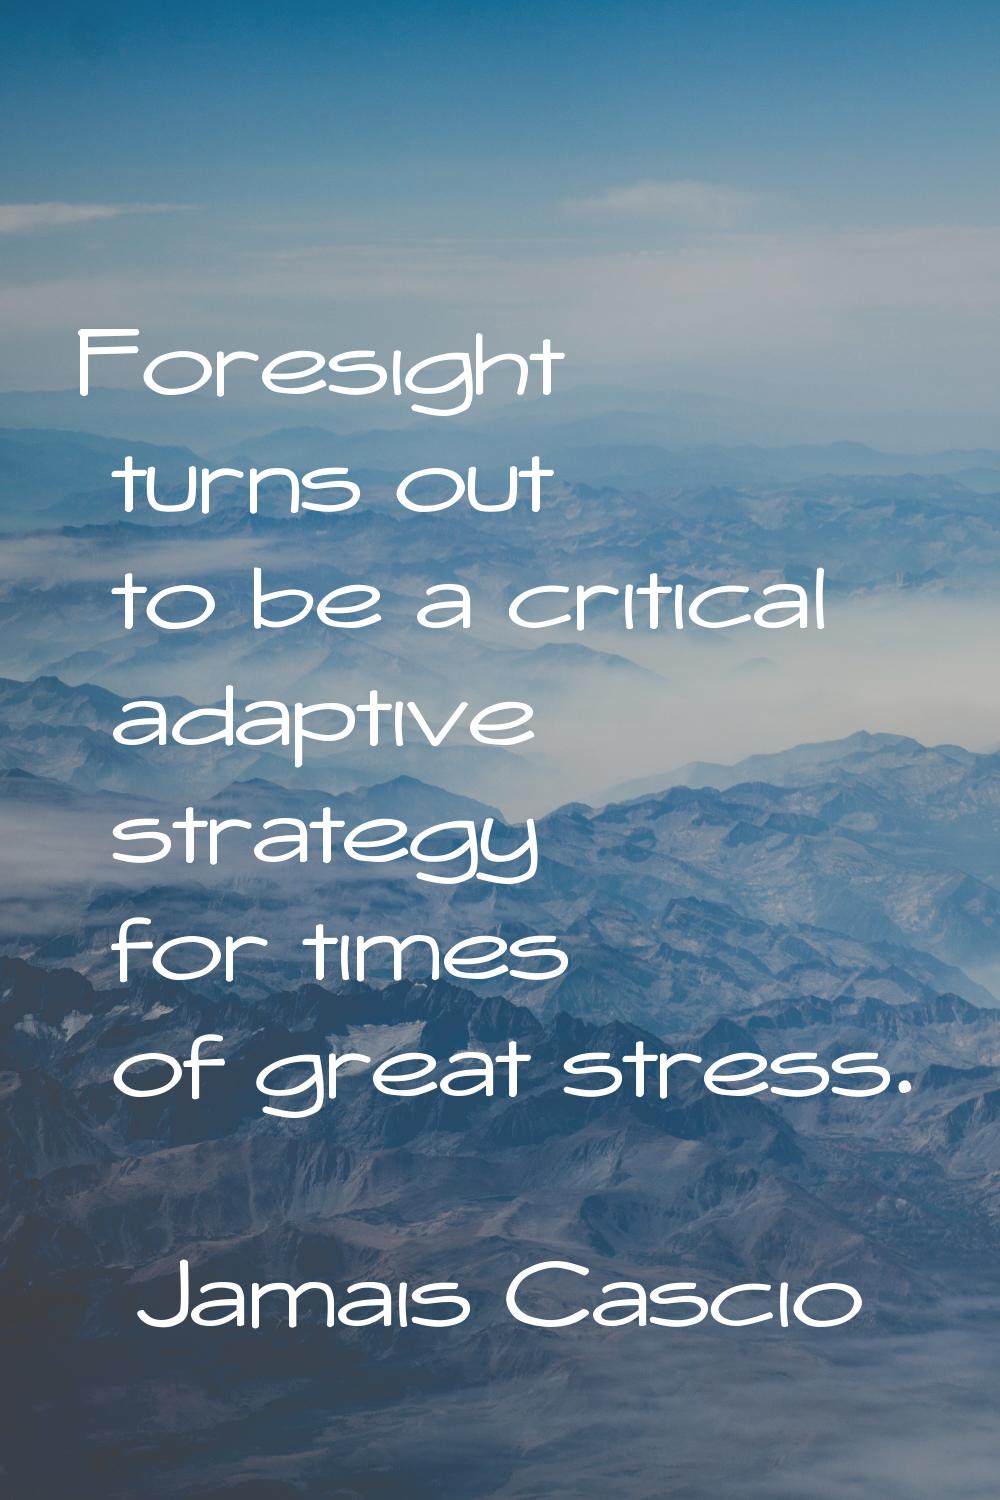 Foresight turns out to be a critical adaptive strategy for times of great stress.